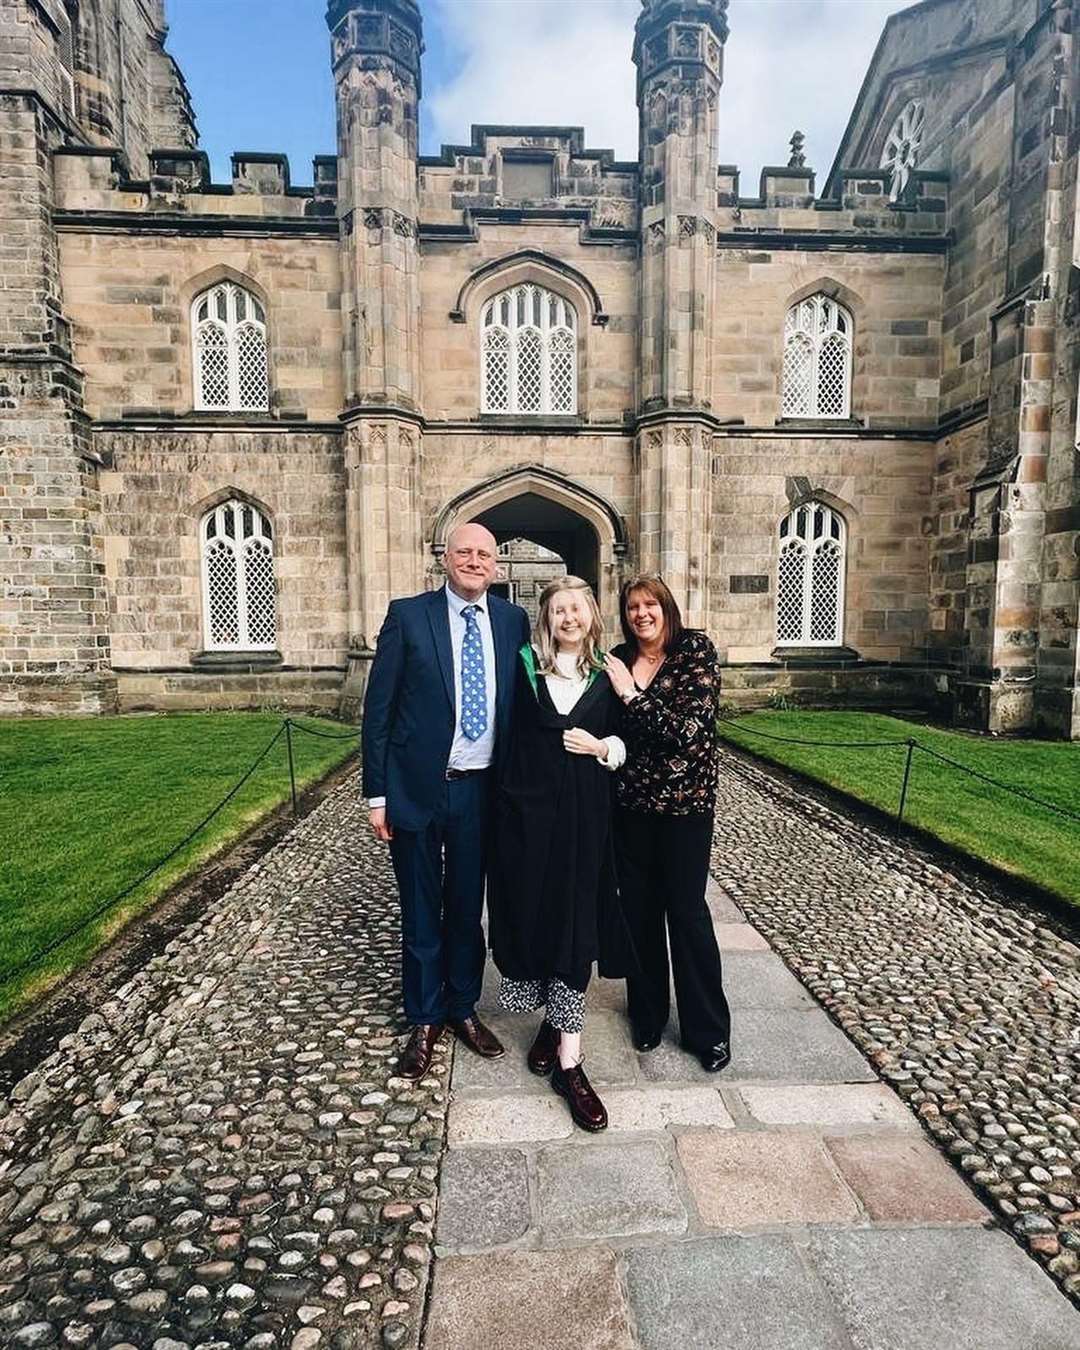 Rachel with her parents James and Ruth on Graduation day.